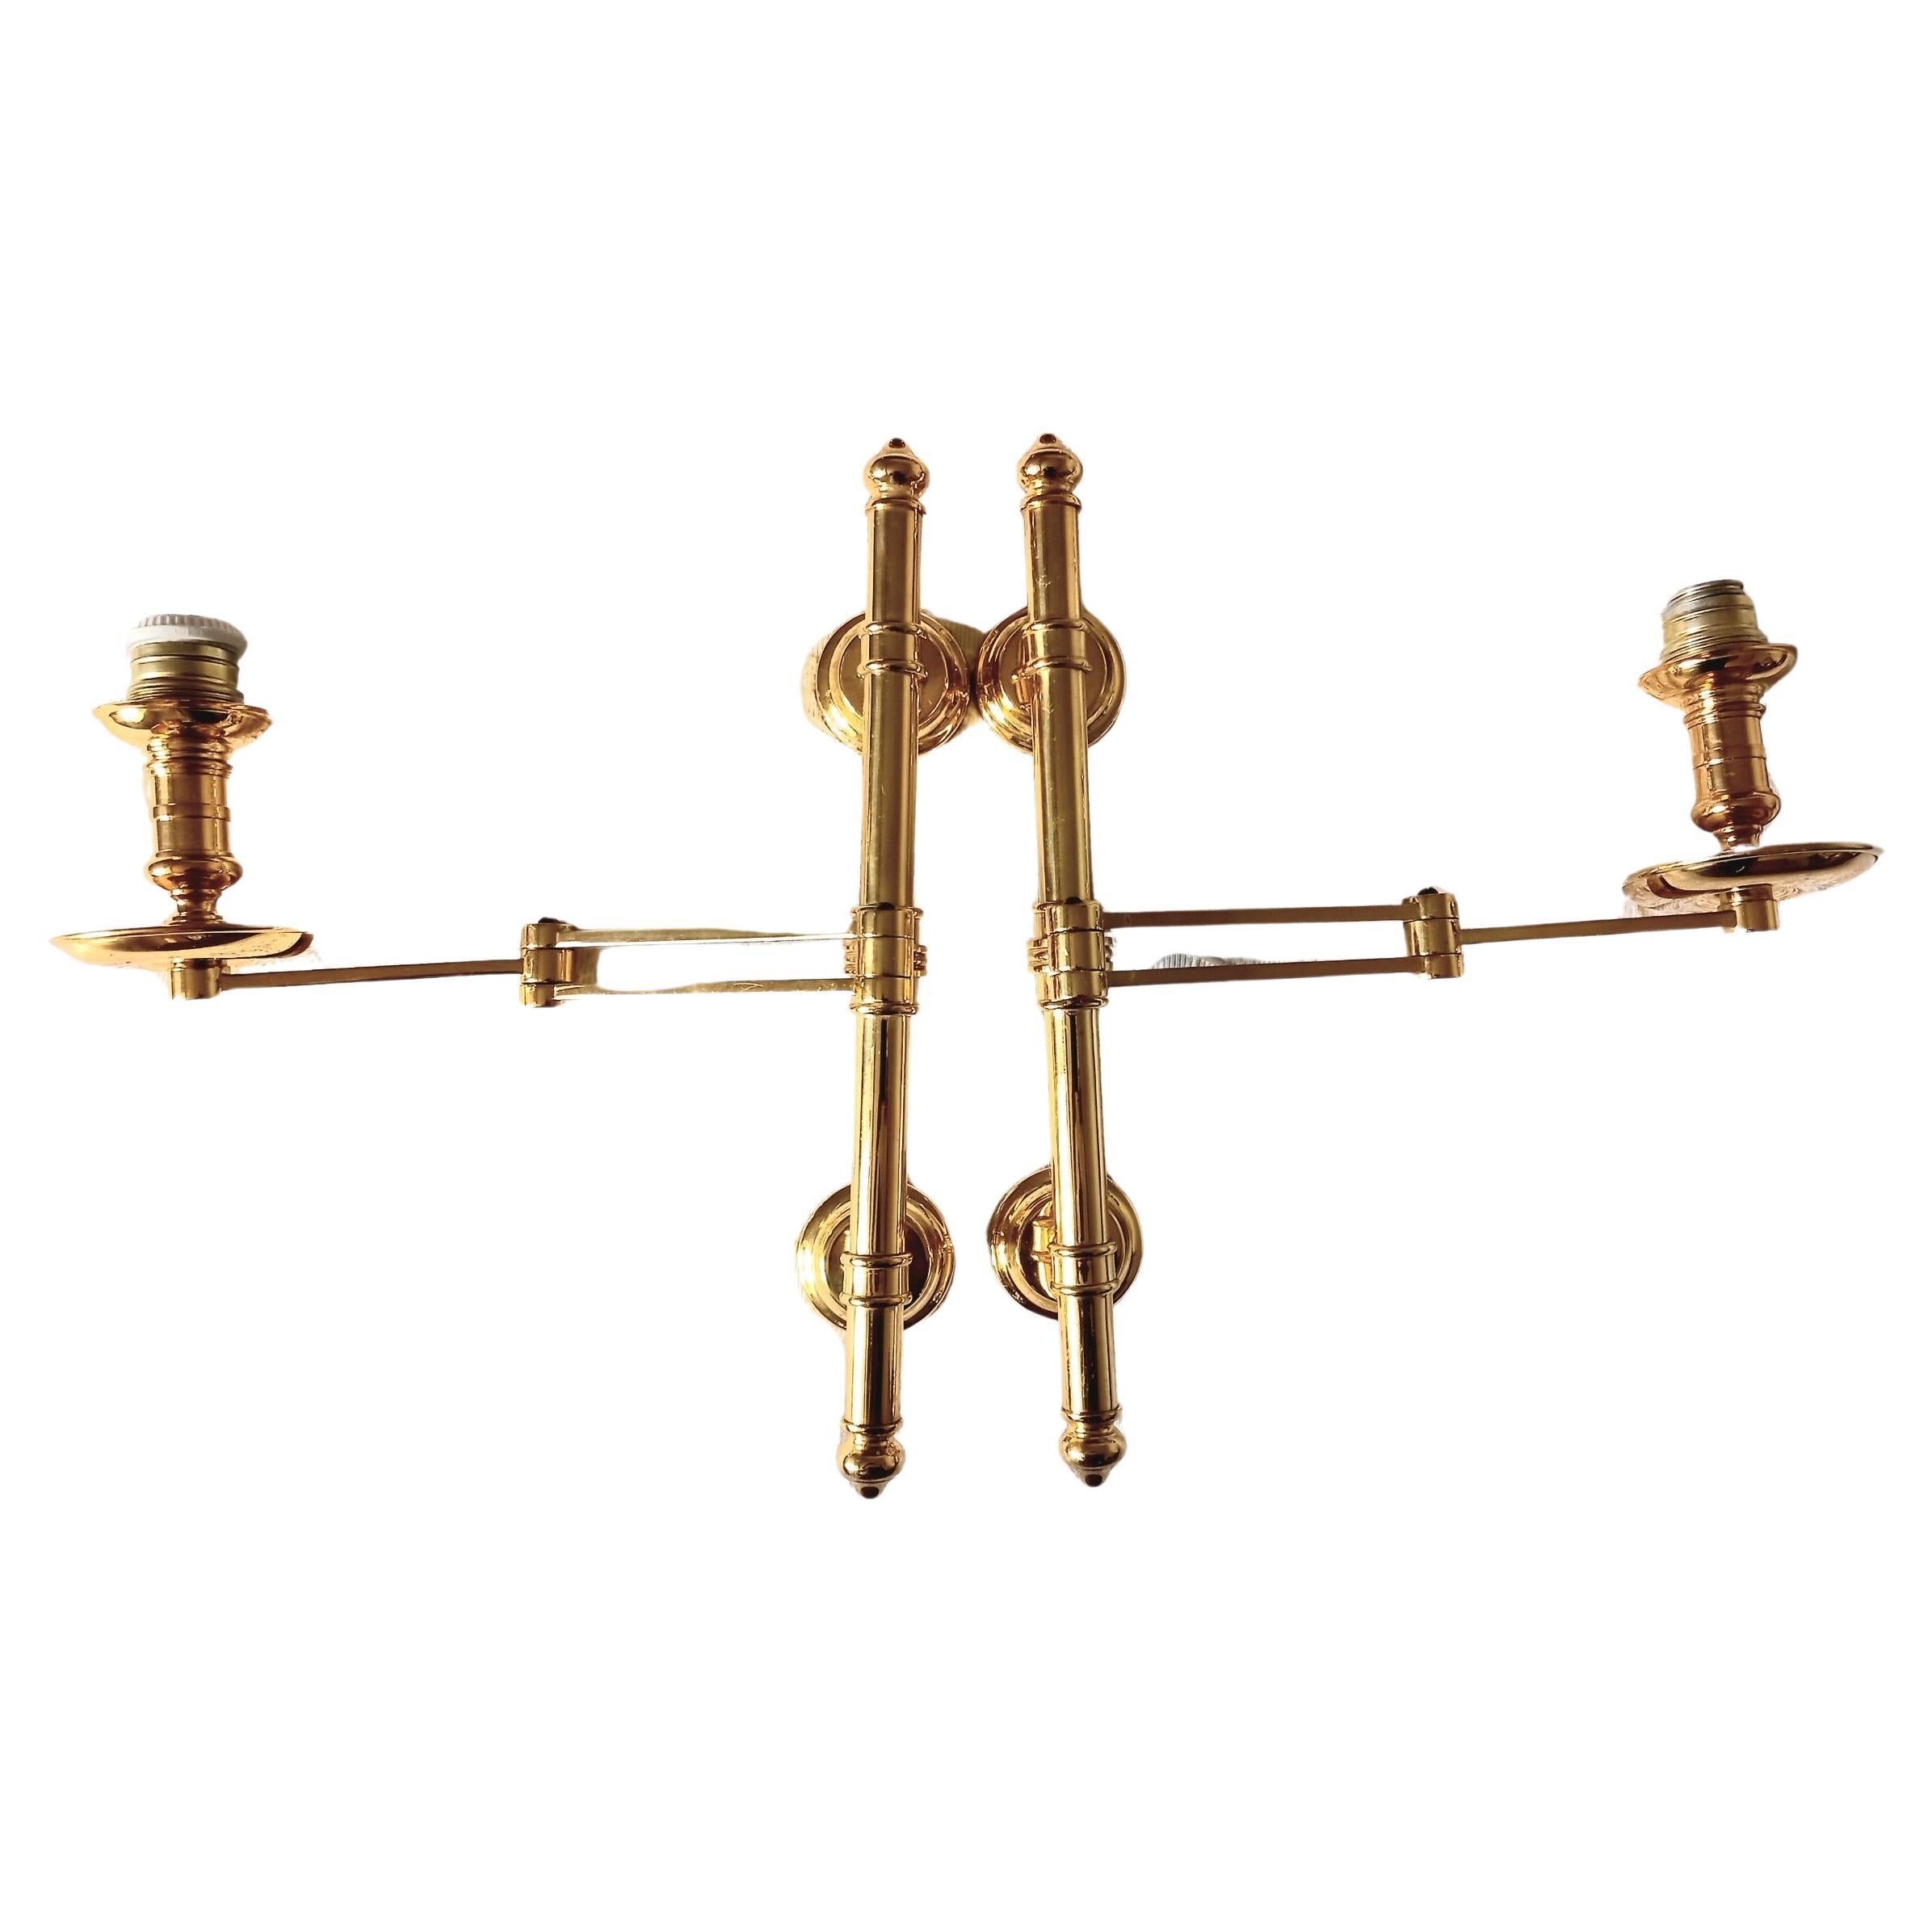  Pair of French Mison Jansen Swing Arm Sconces For Sale